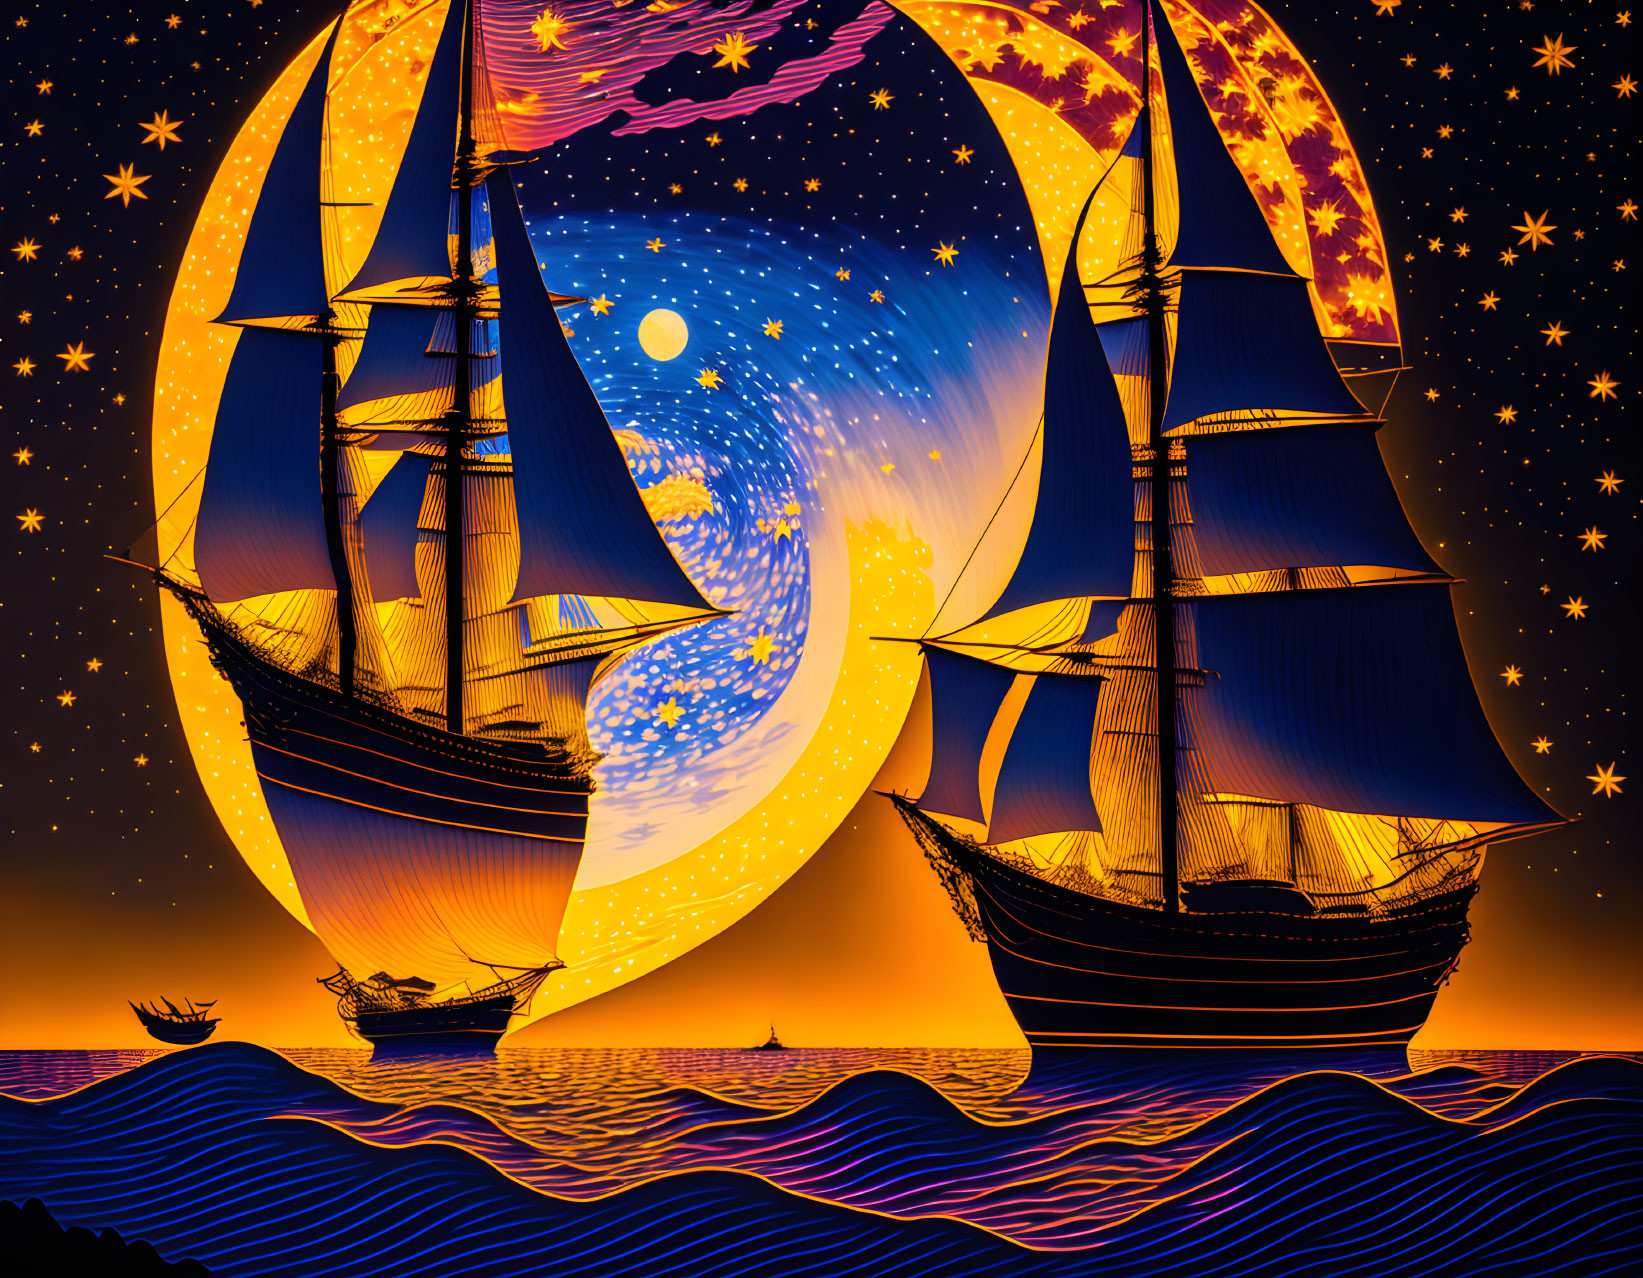 Surreal sailing ships on swirling sea with starry night and sunset sky merging.